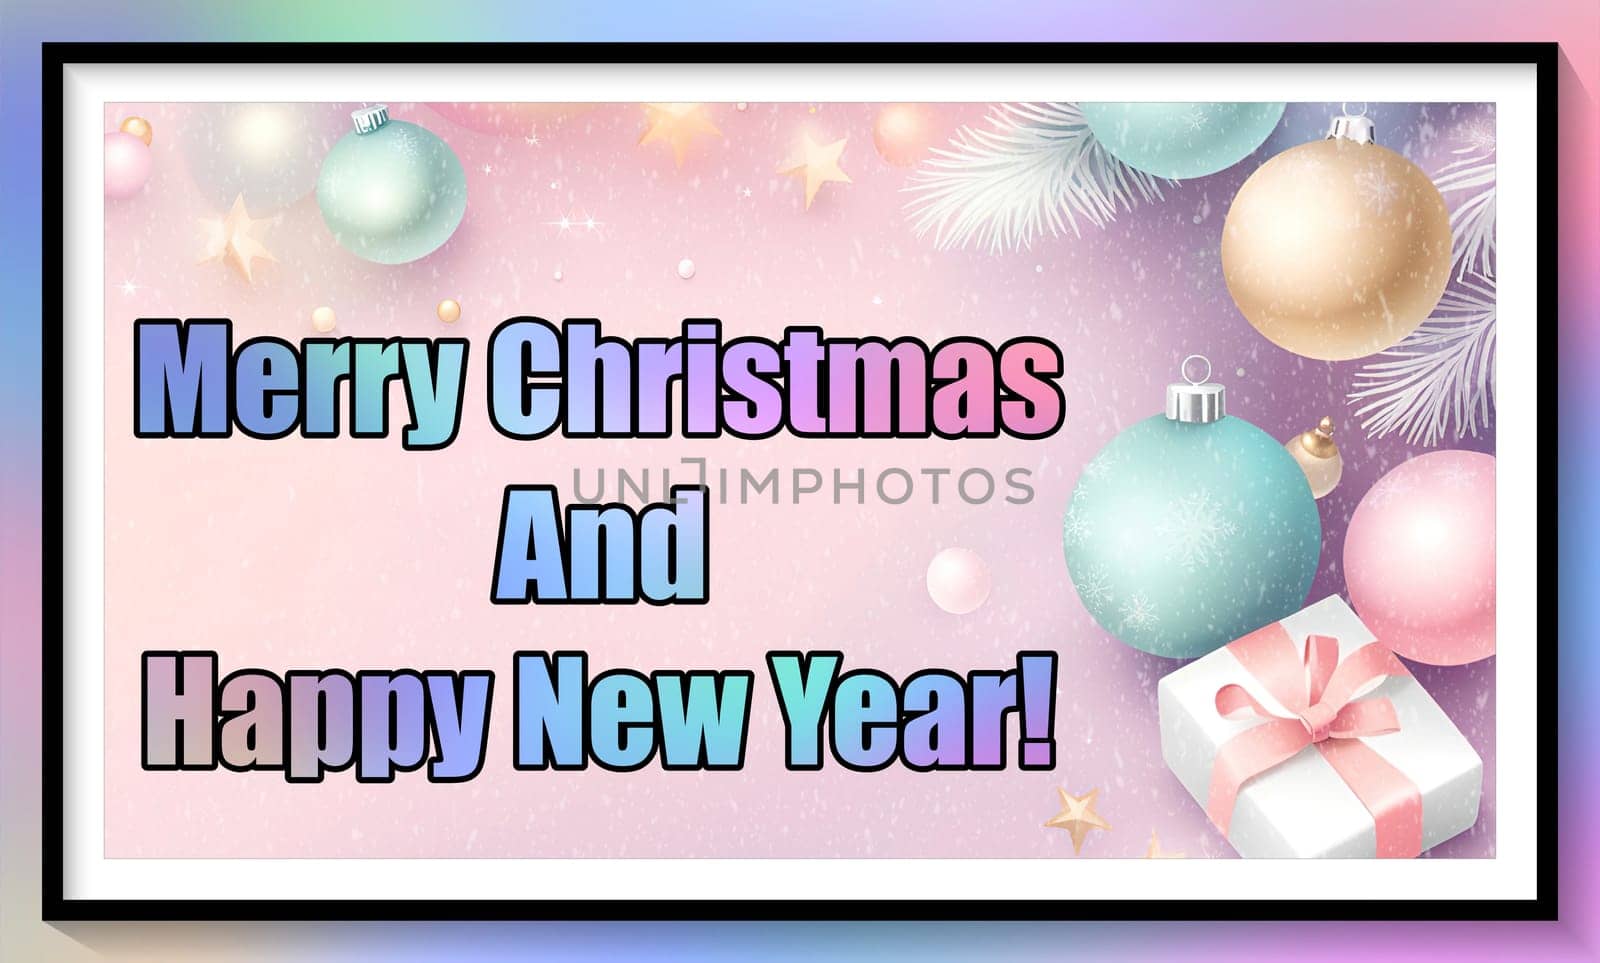 Merry Christmas and Happy New Year greeting card. Christmas greeting card with text Merry Christmas and Happy New Year.